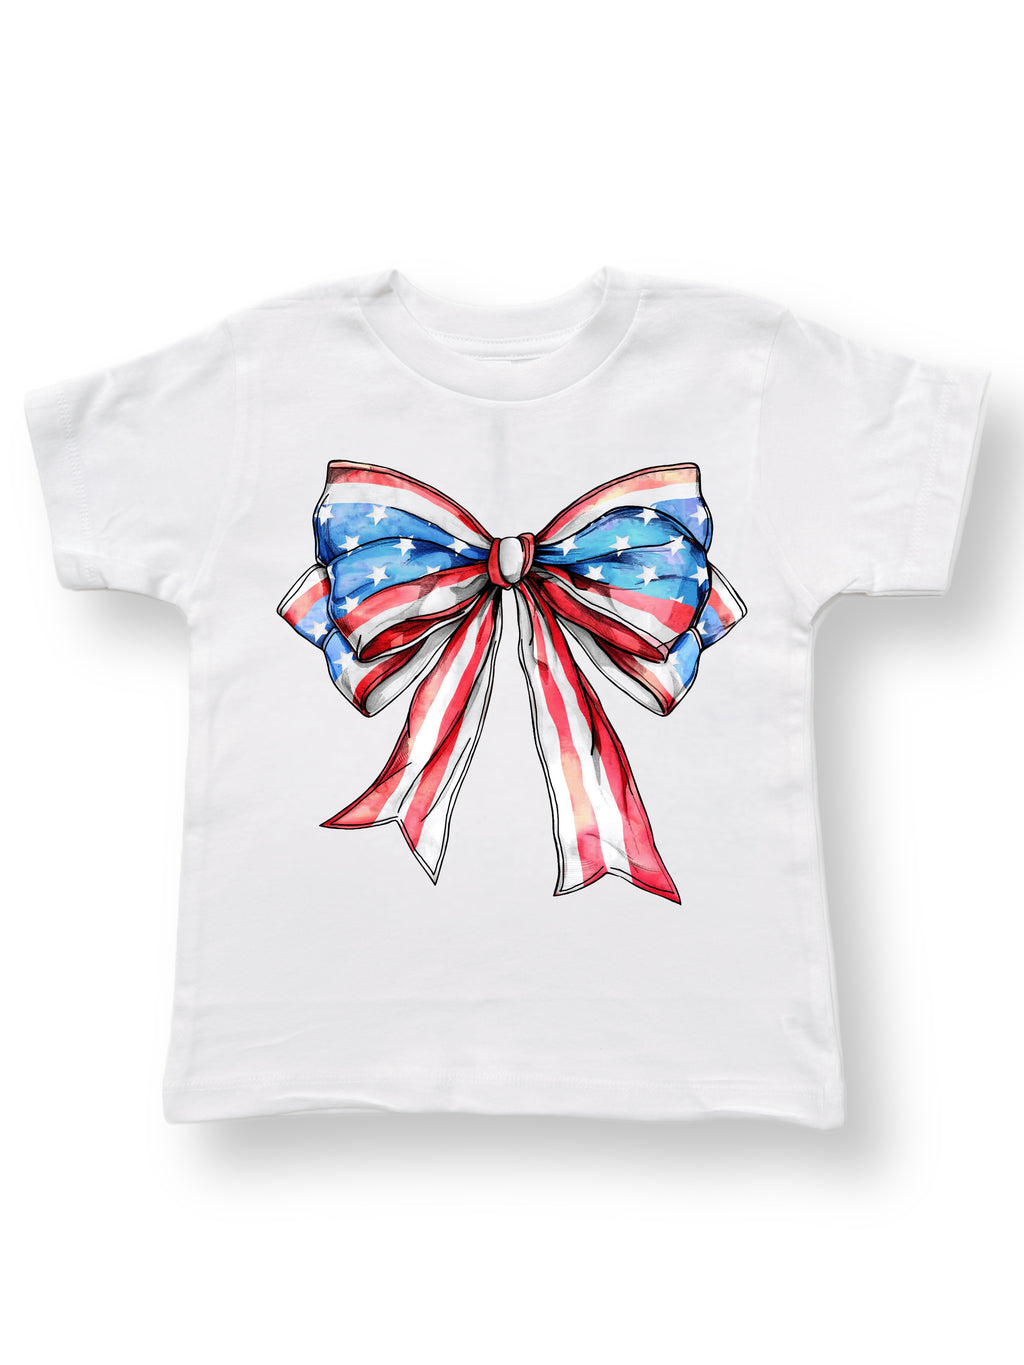 "Red White and Giant Bow" Tee